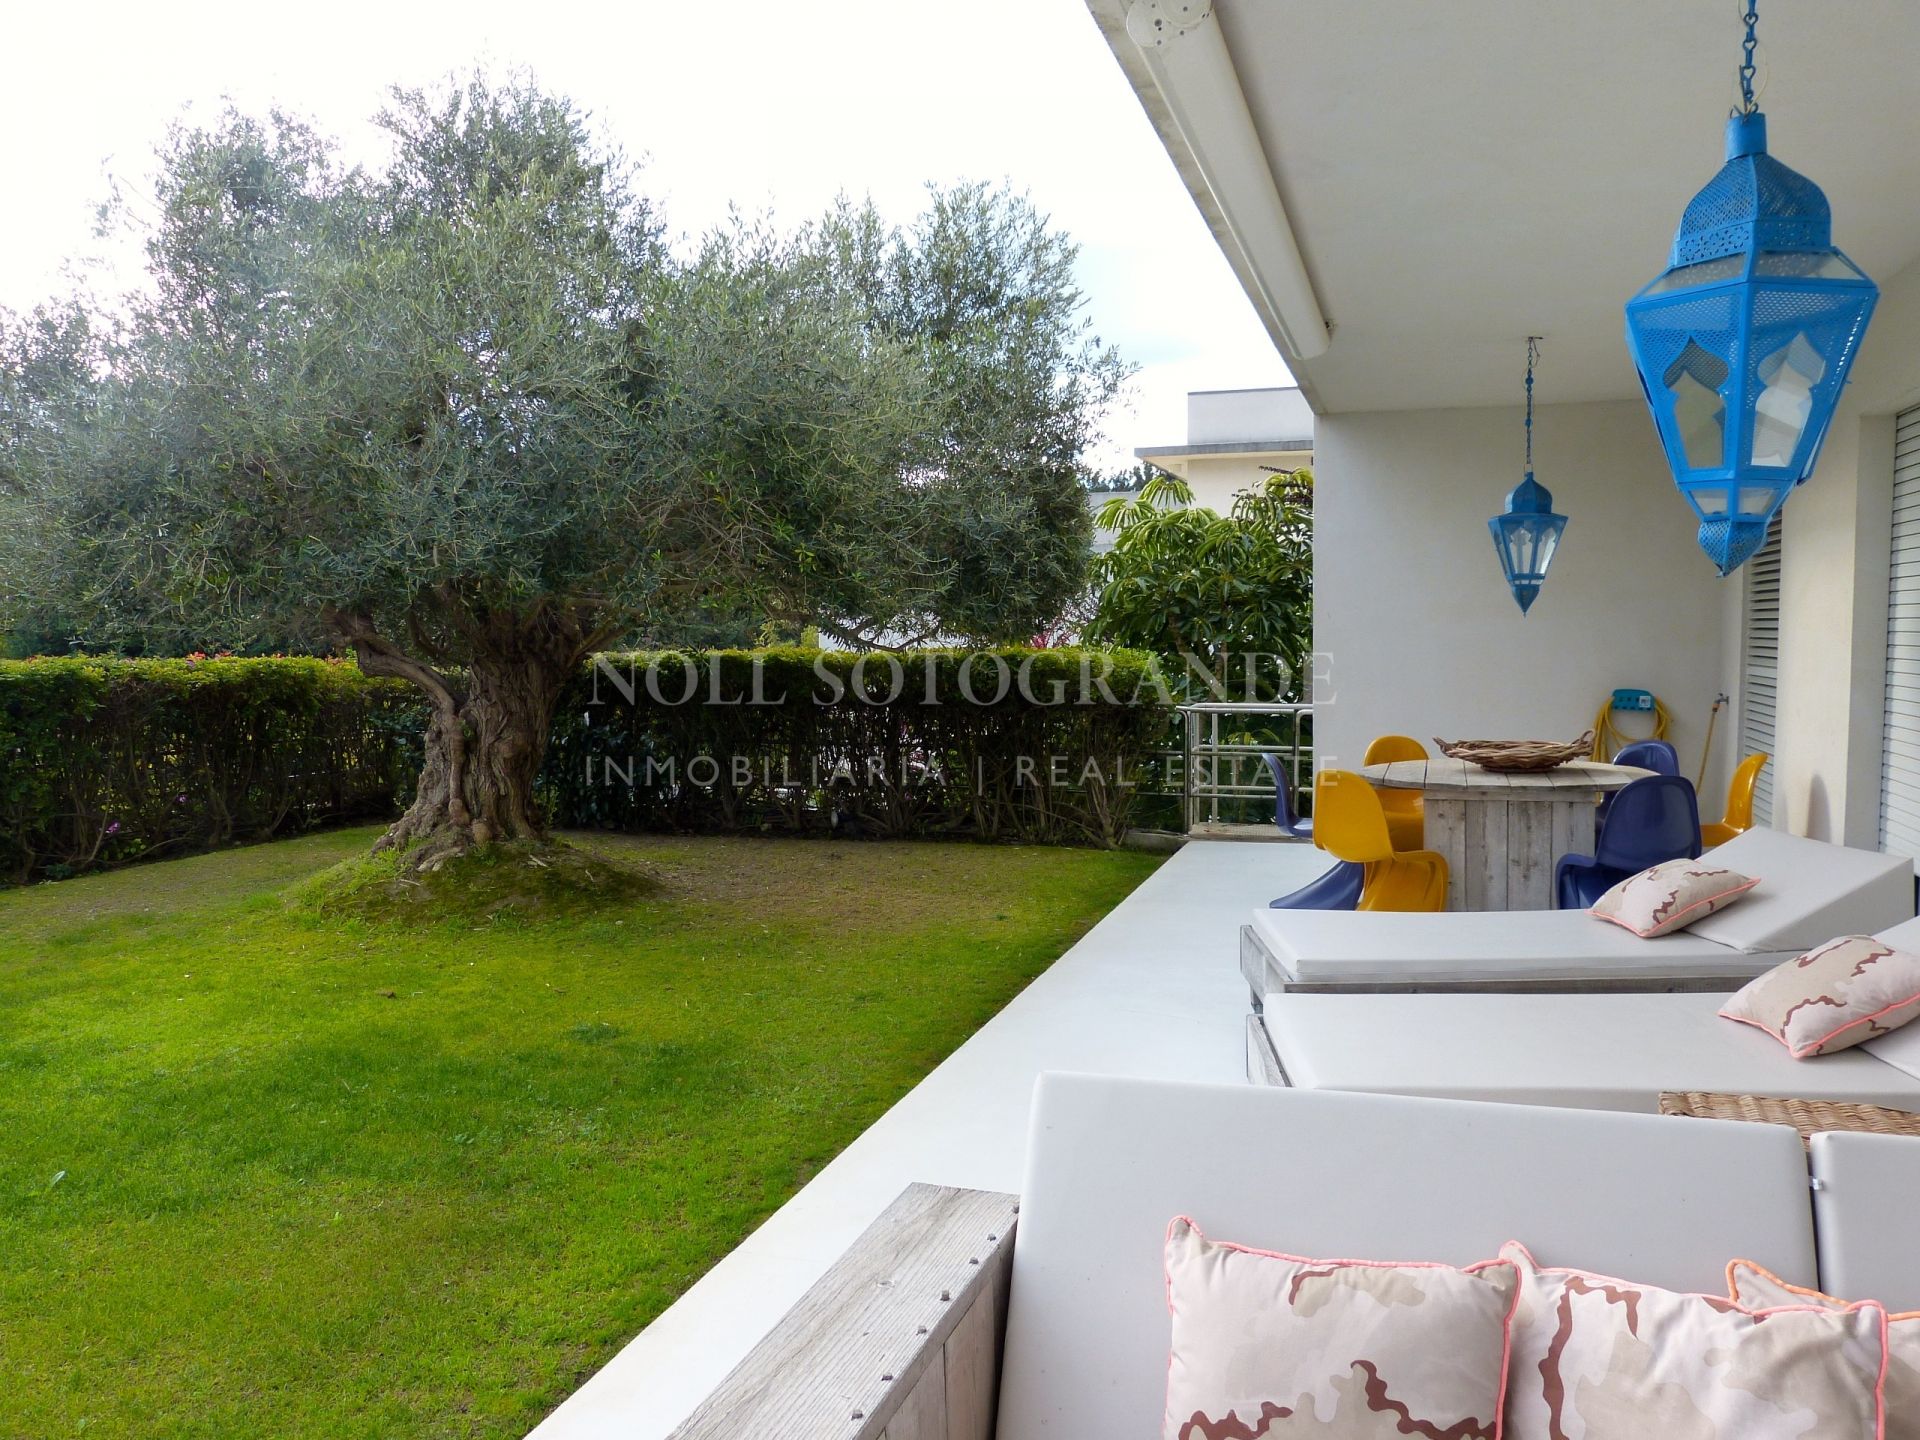 Large luxurious, modern apartment available in Sotogrande Pologardens